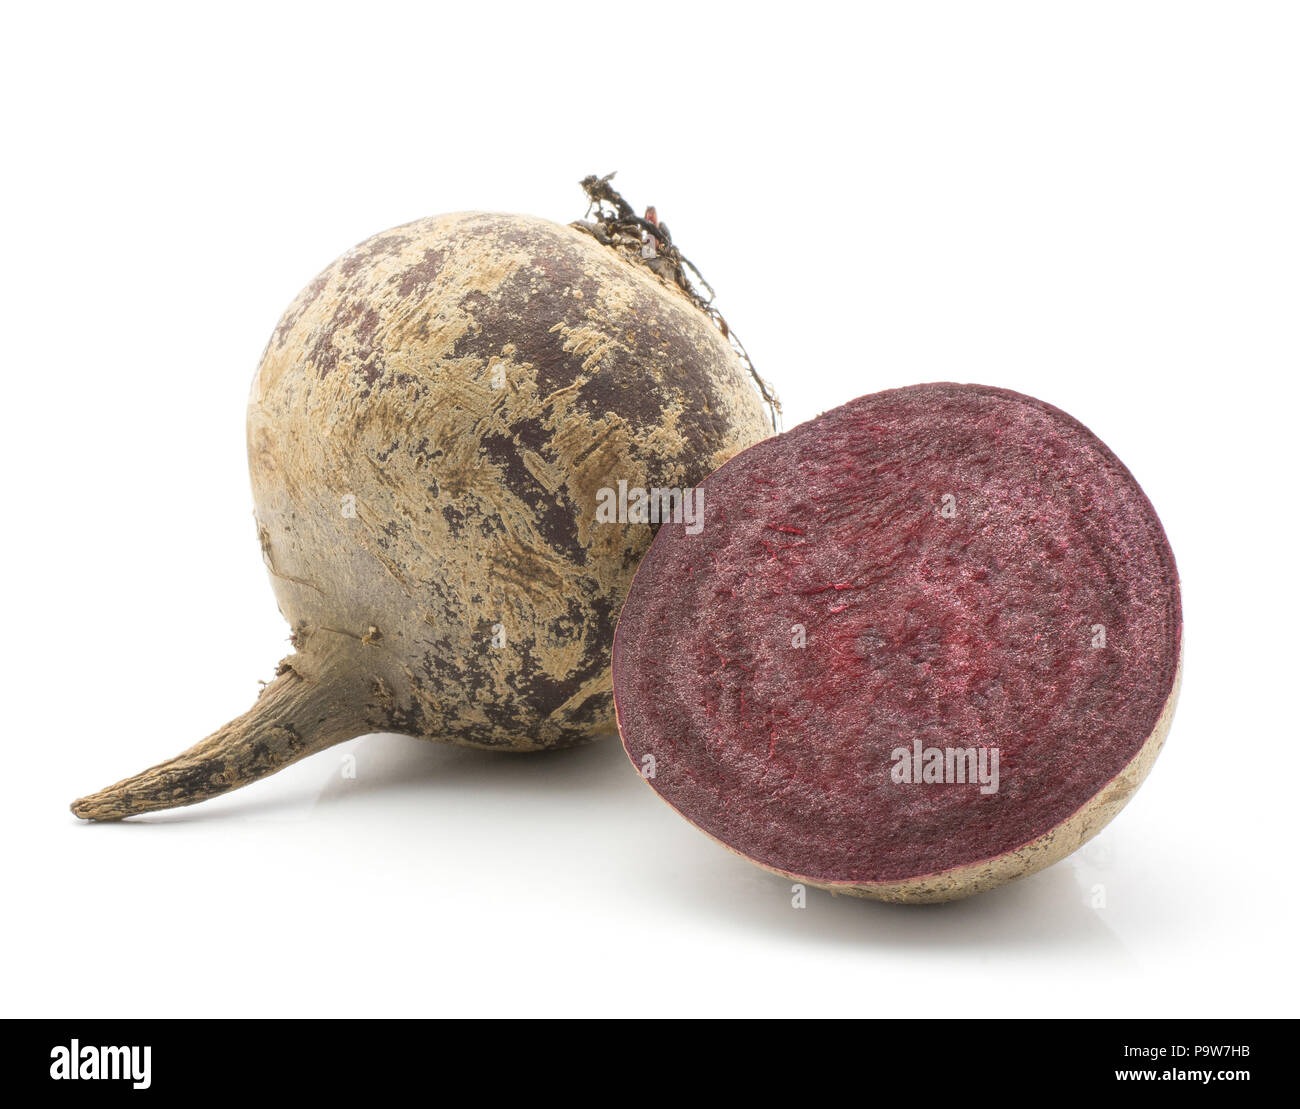 One beetroot bulb and a half (raw red beet) isolated on white background  Stock Photo - Alamy